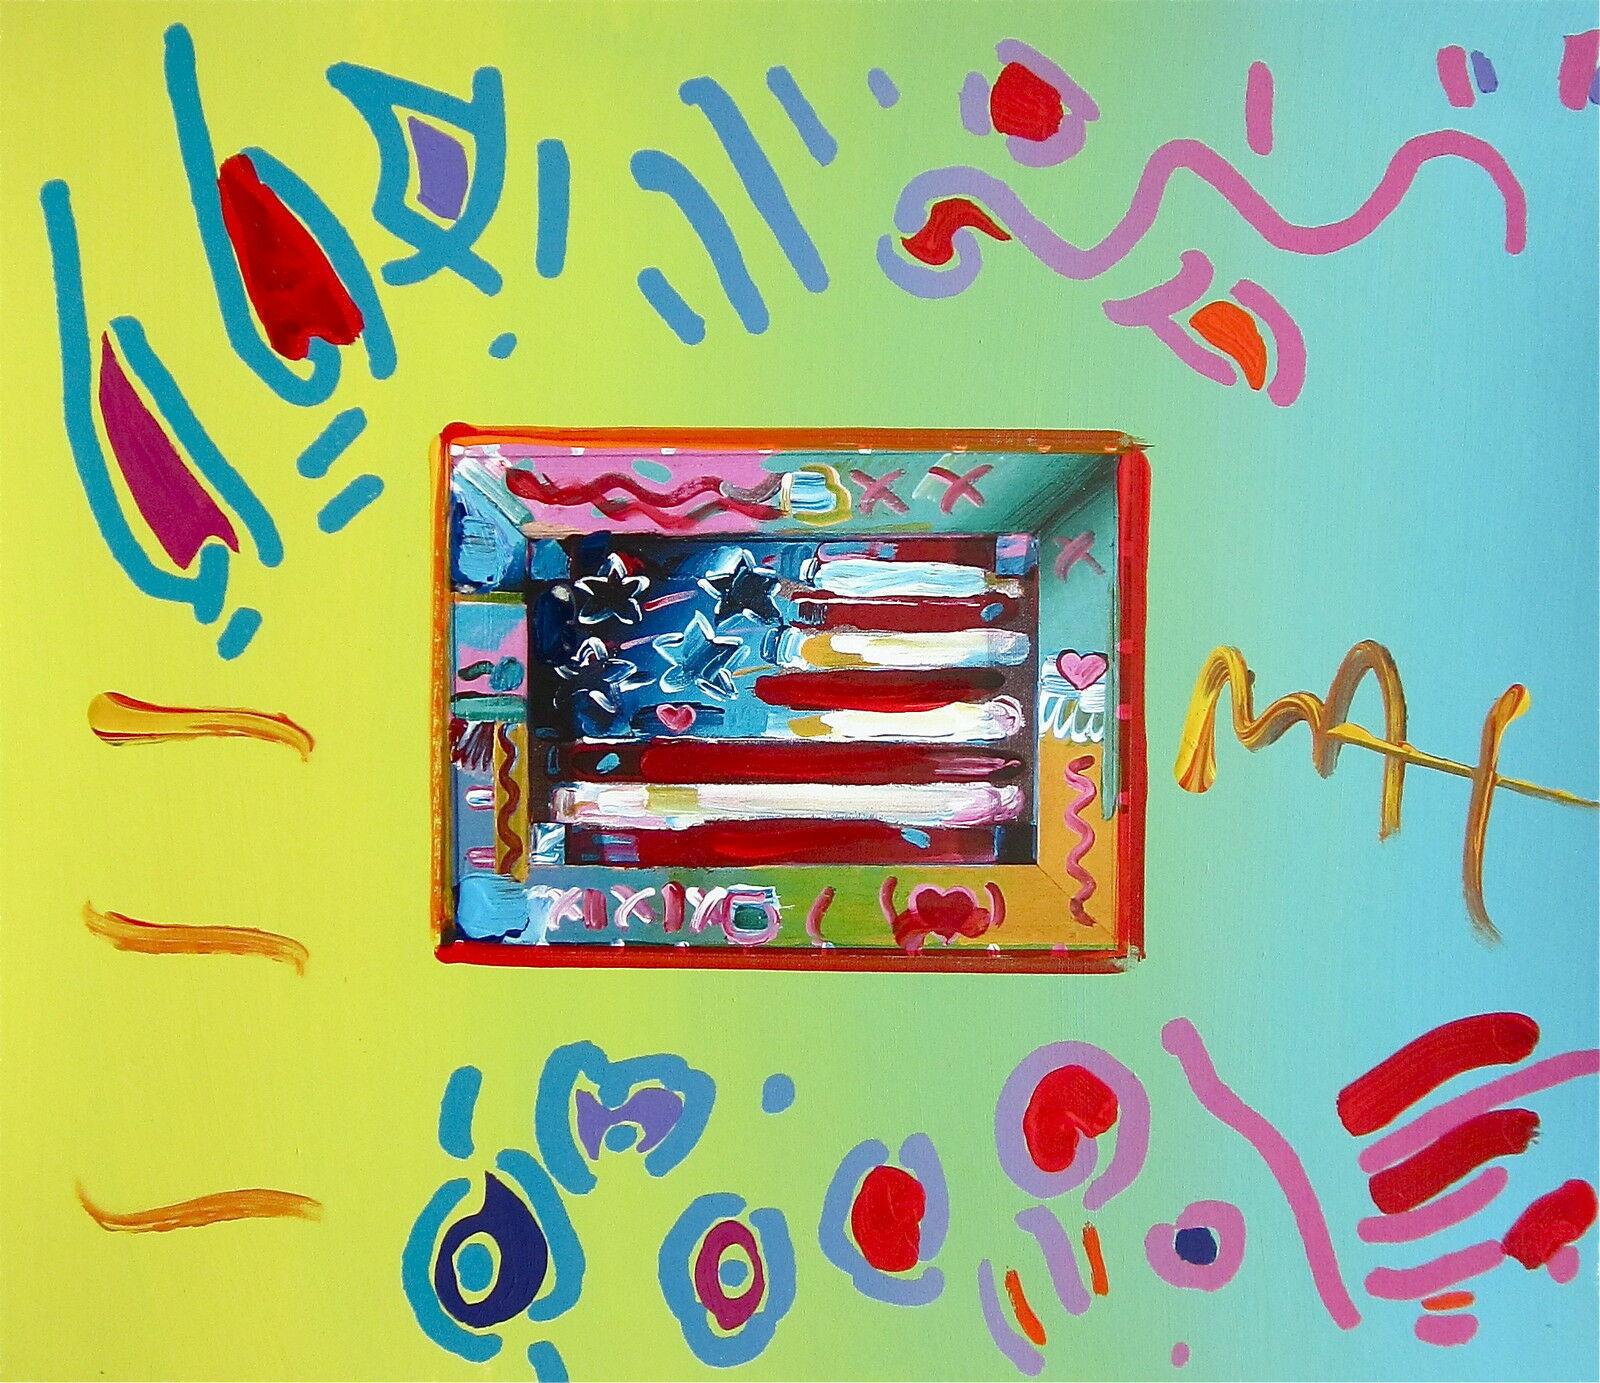 Artist: Peter Max (1937)
Title: Flag
Year: 1997
Medium: Lithograph and acrylic on Arches paper
Size: 12 x 14 inches
Condition: Excellent
Inscription: Signed and by the artist.

PETER MAX (1937- ) Peter Max has achieved huge success and world-wide